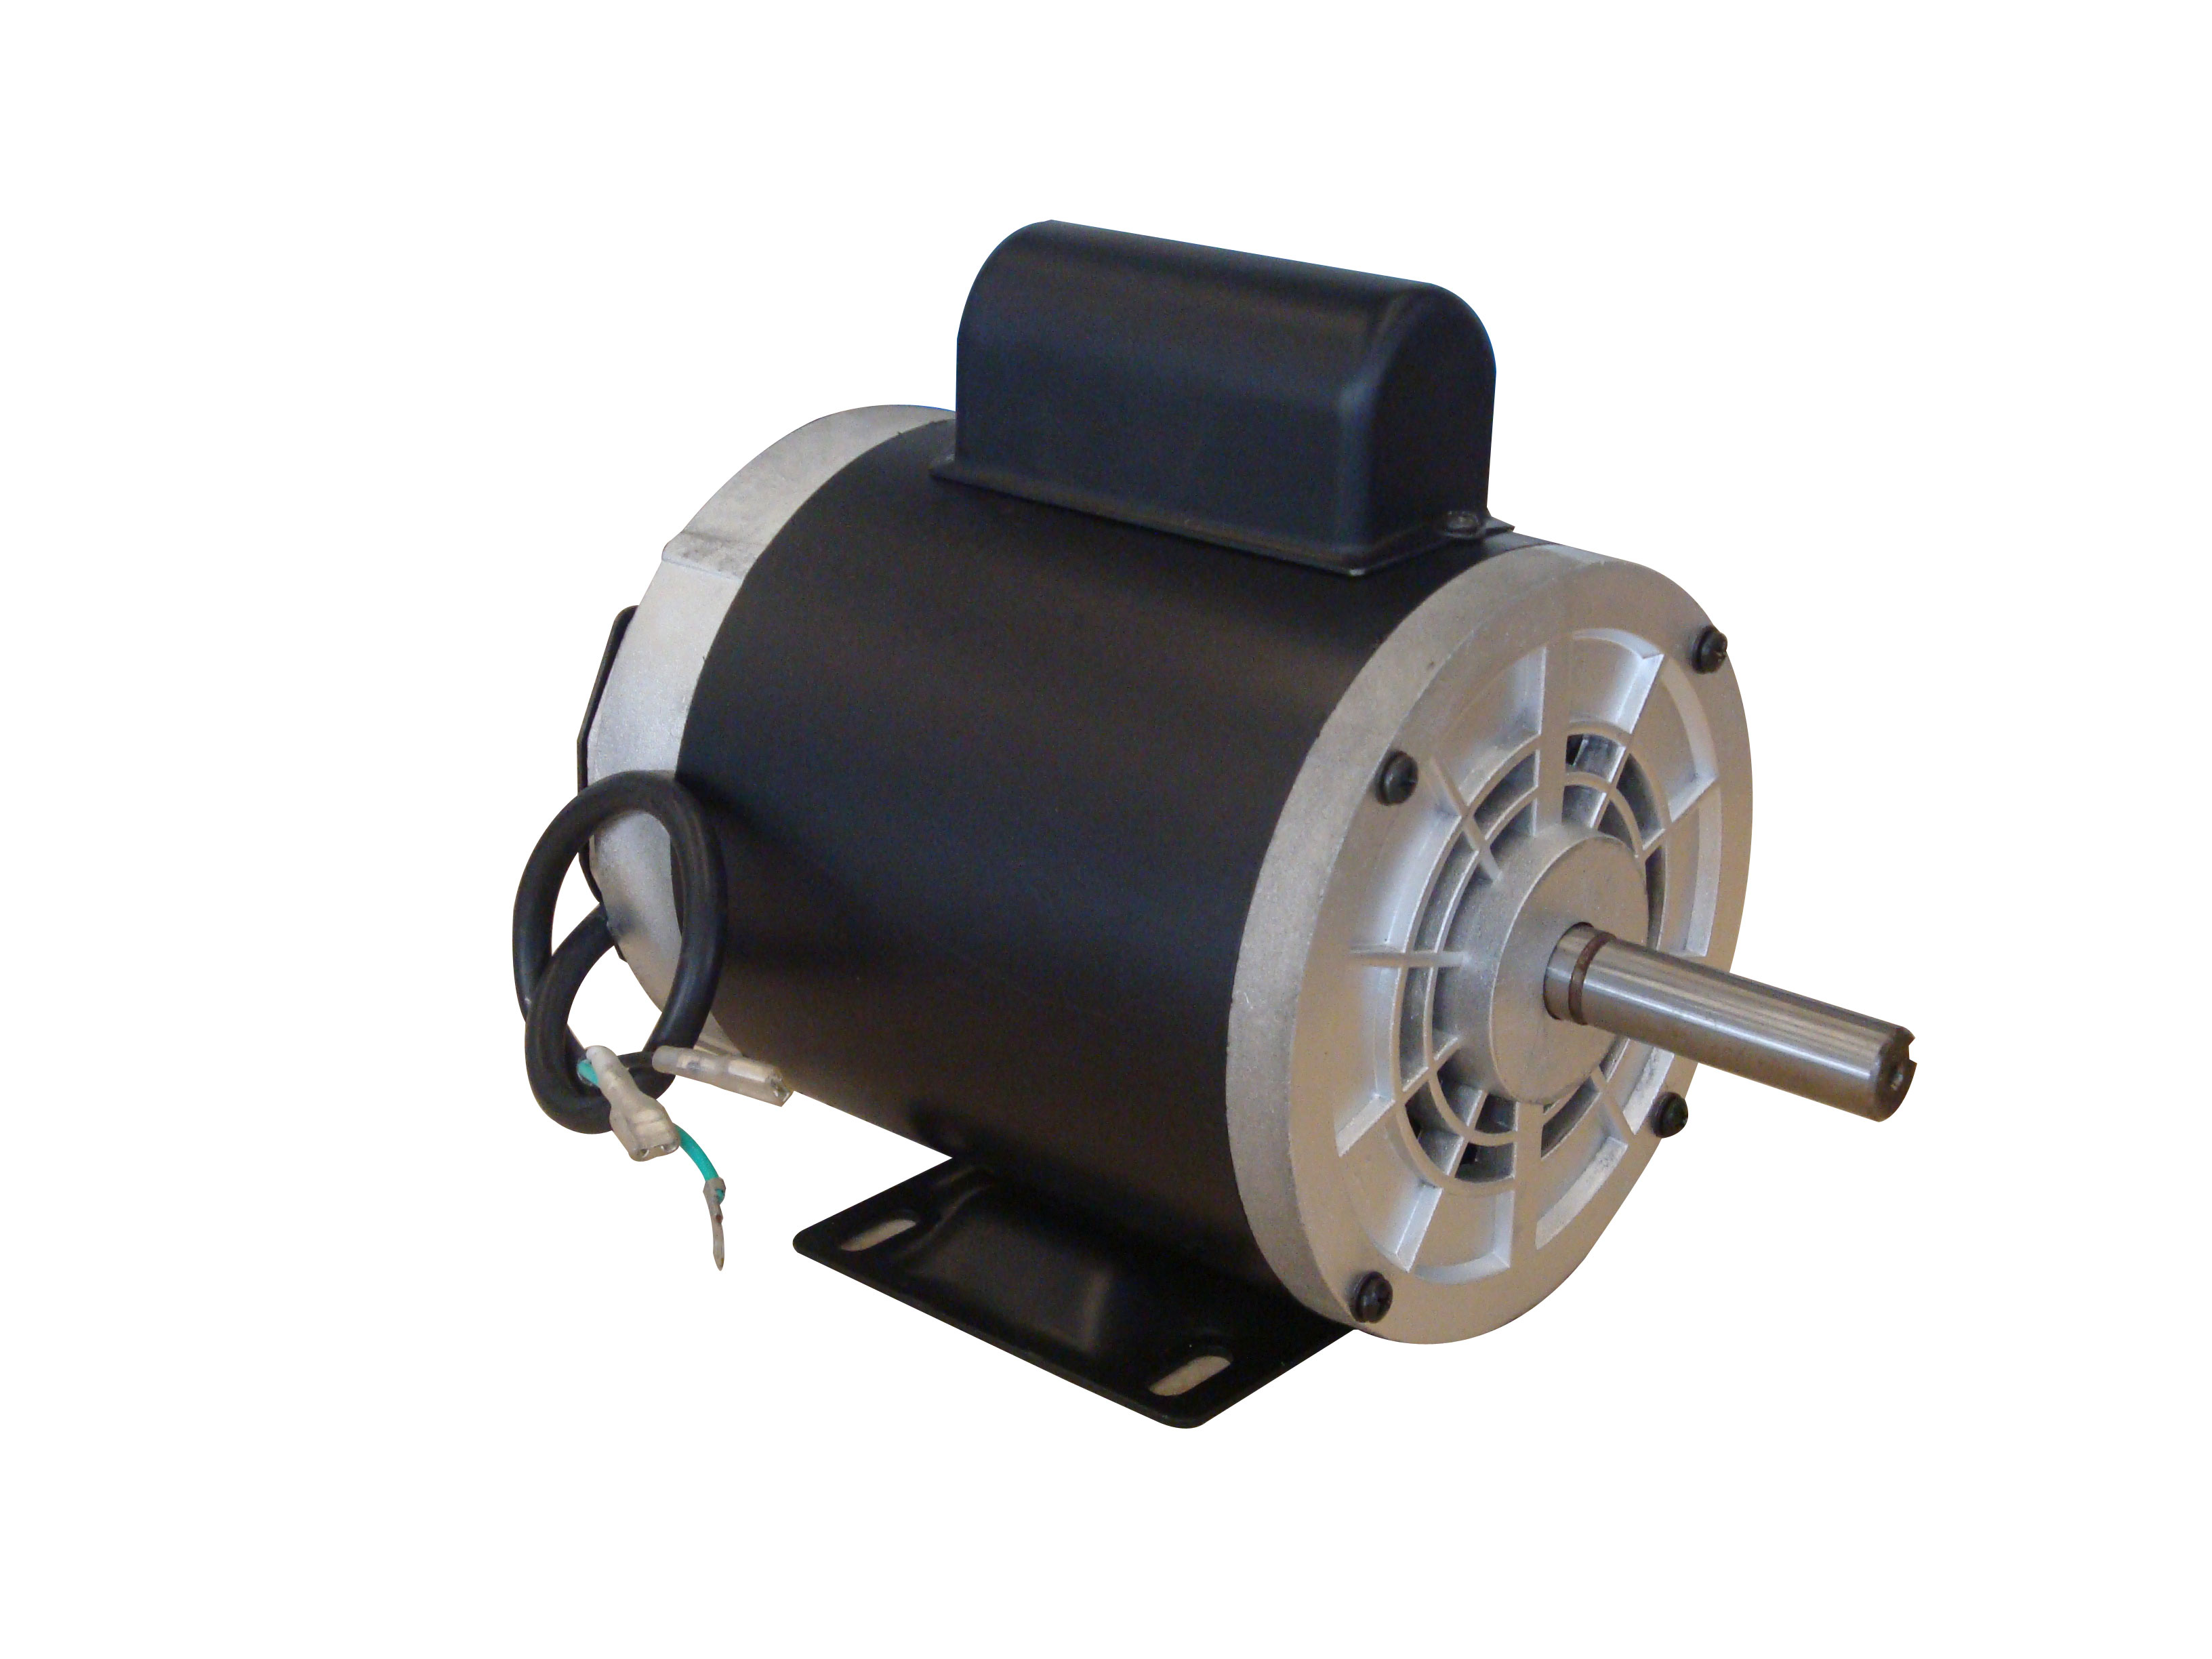 0.55 KW Meat Band Saw Motor